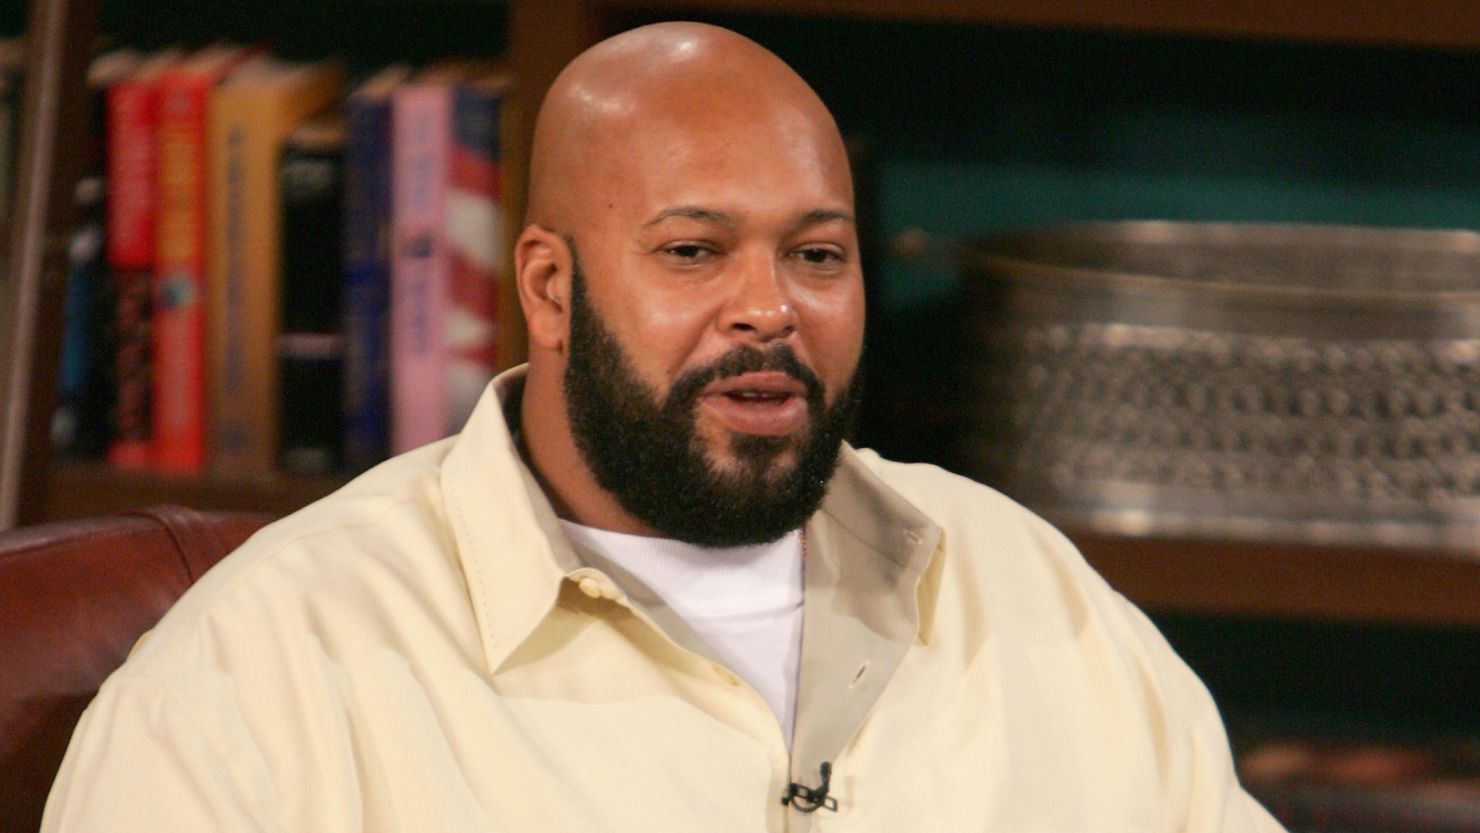 Suge Knight spent time in prison after being convicted of assault with a deadly weapon.